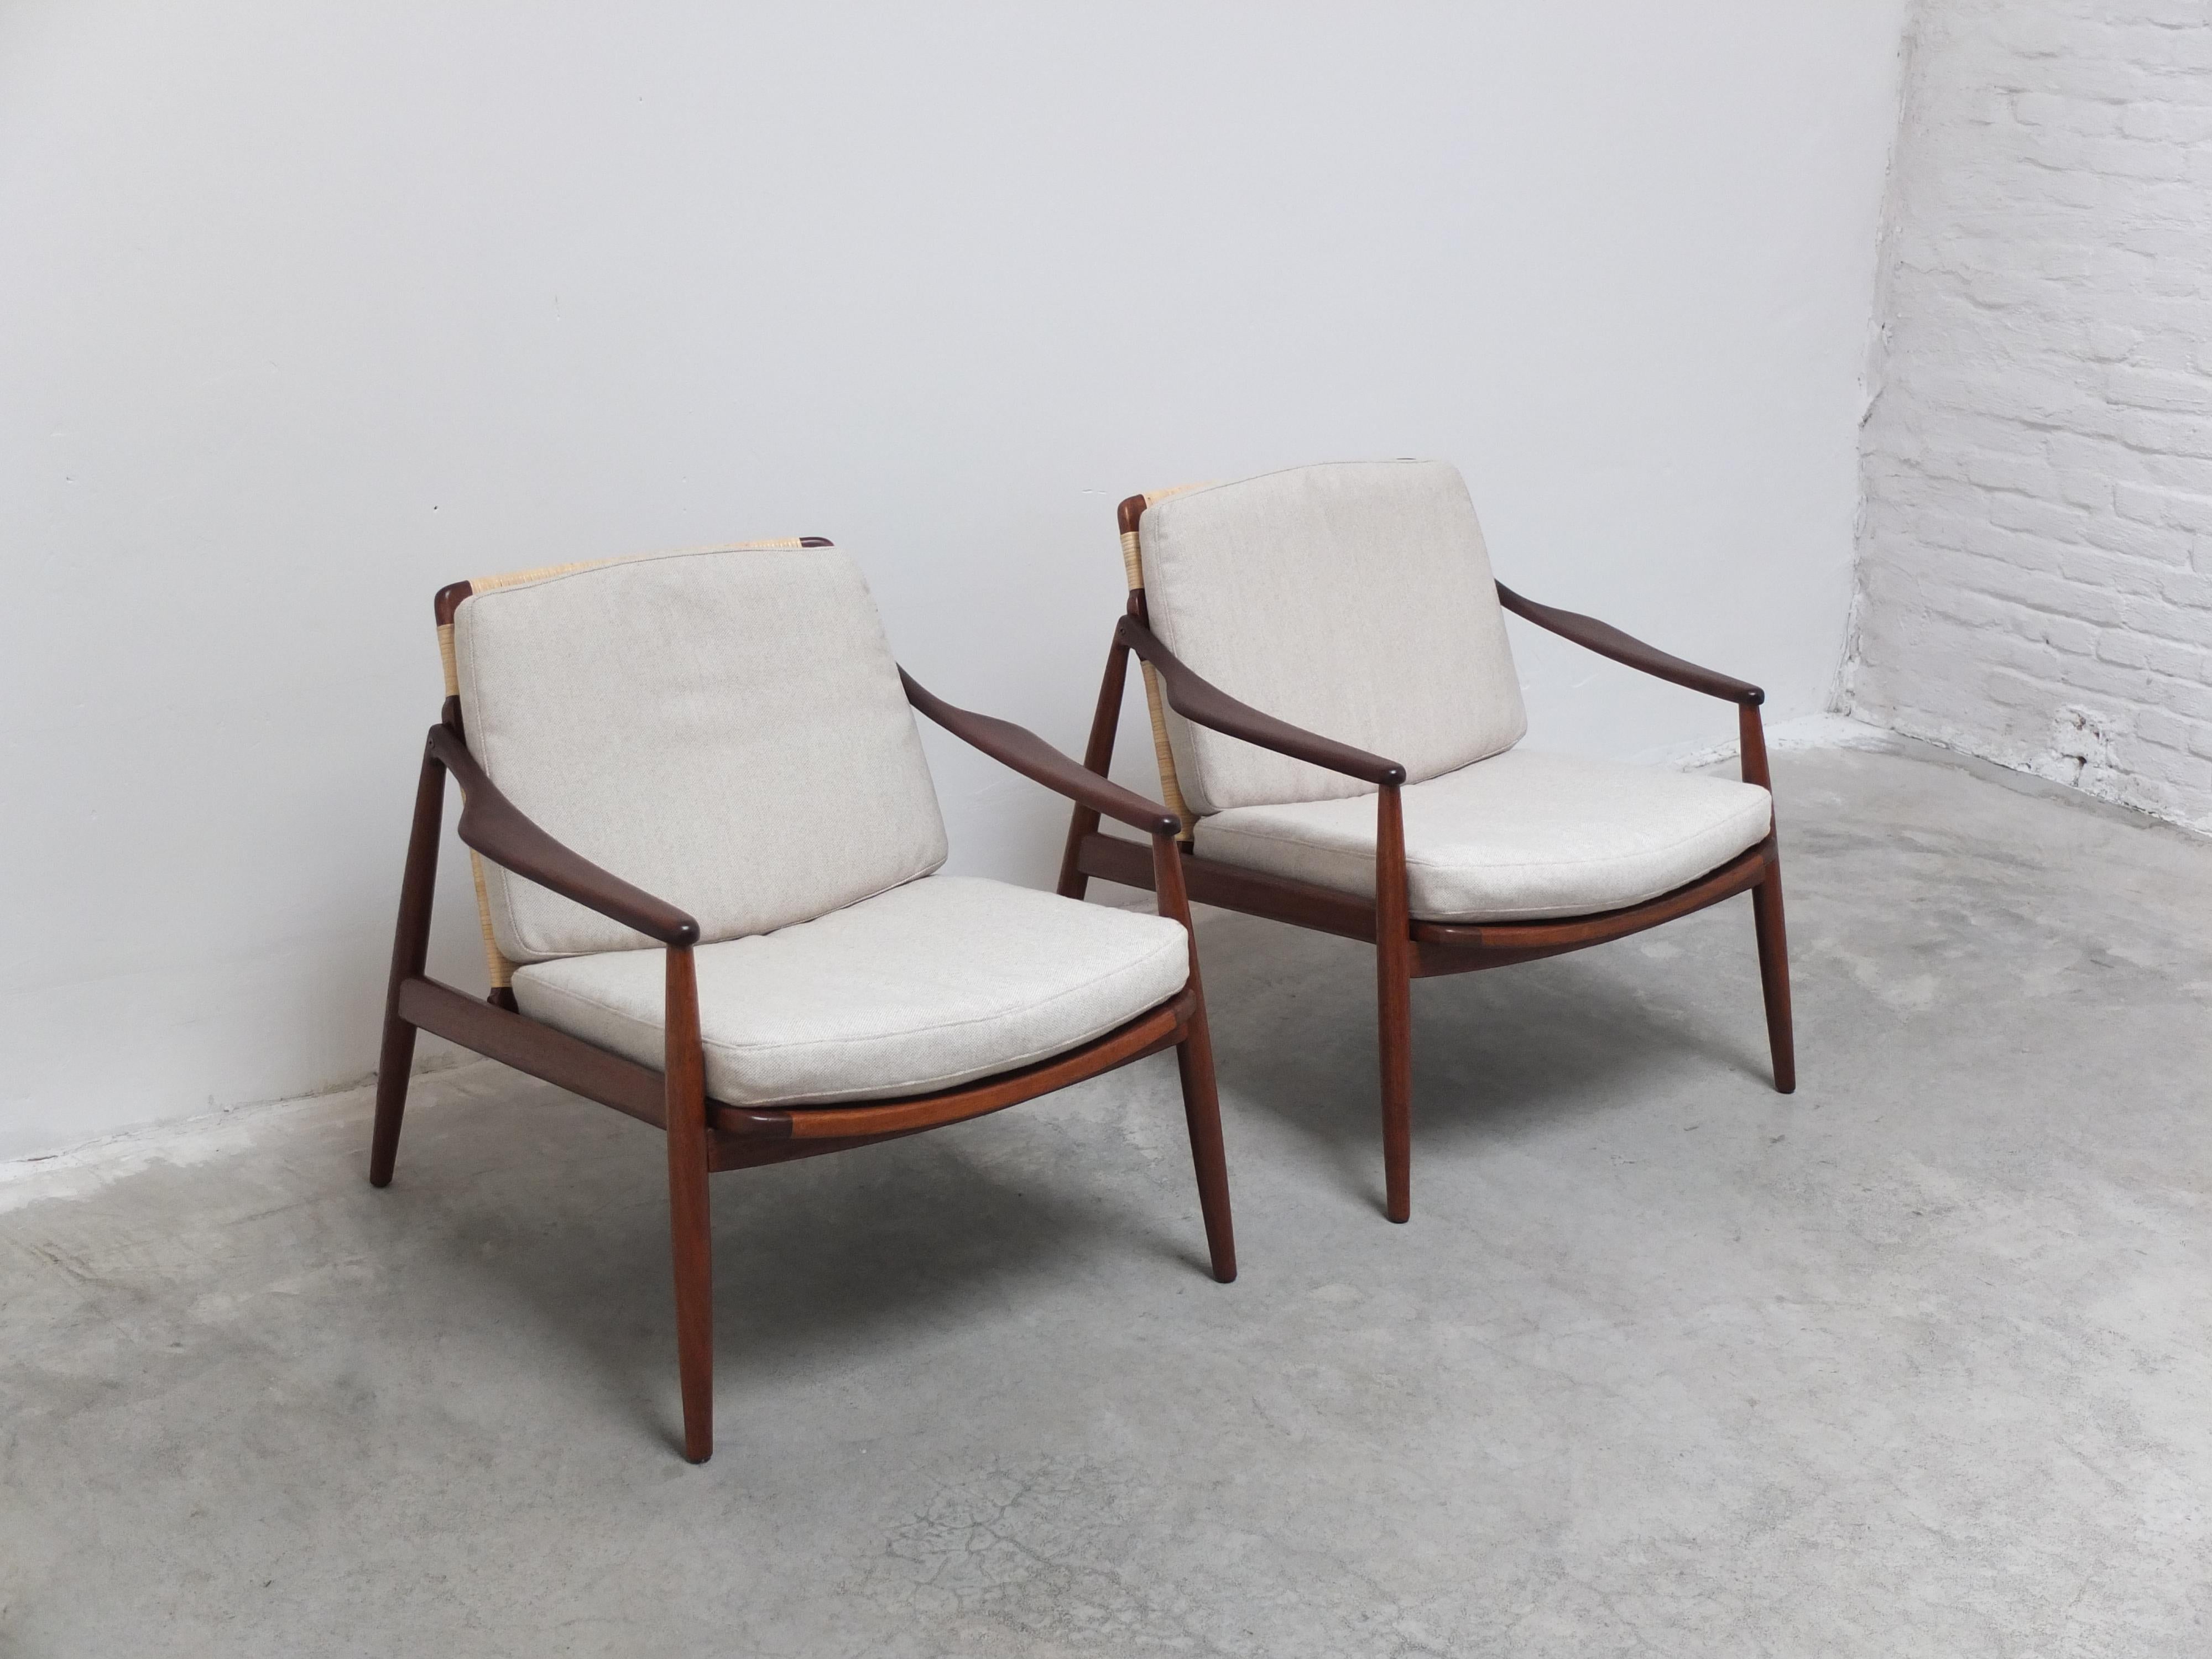 20th Century Pair of 'Model 400' Easy Chairs by Hartmut Lohmeyer for Wilkhahn, 1956 For Sale